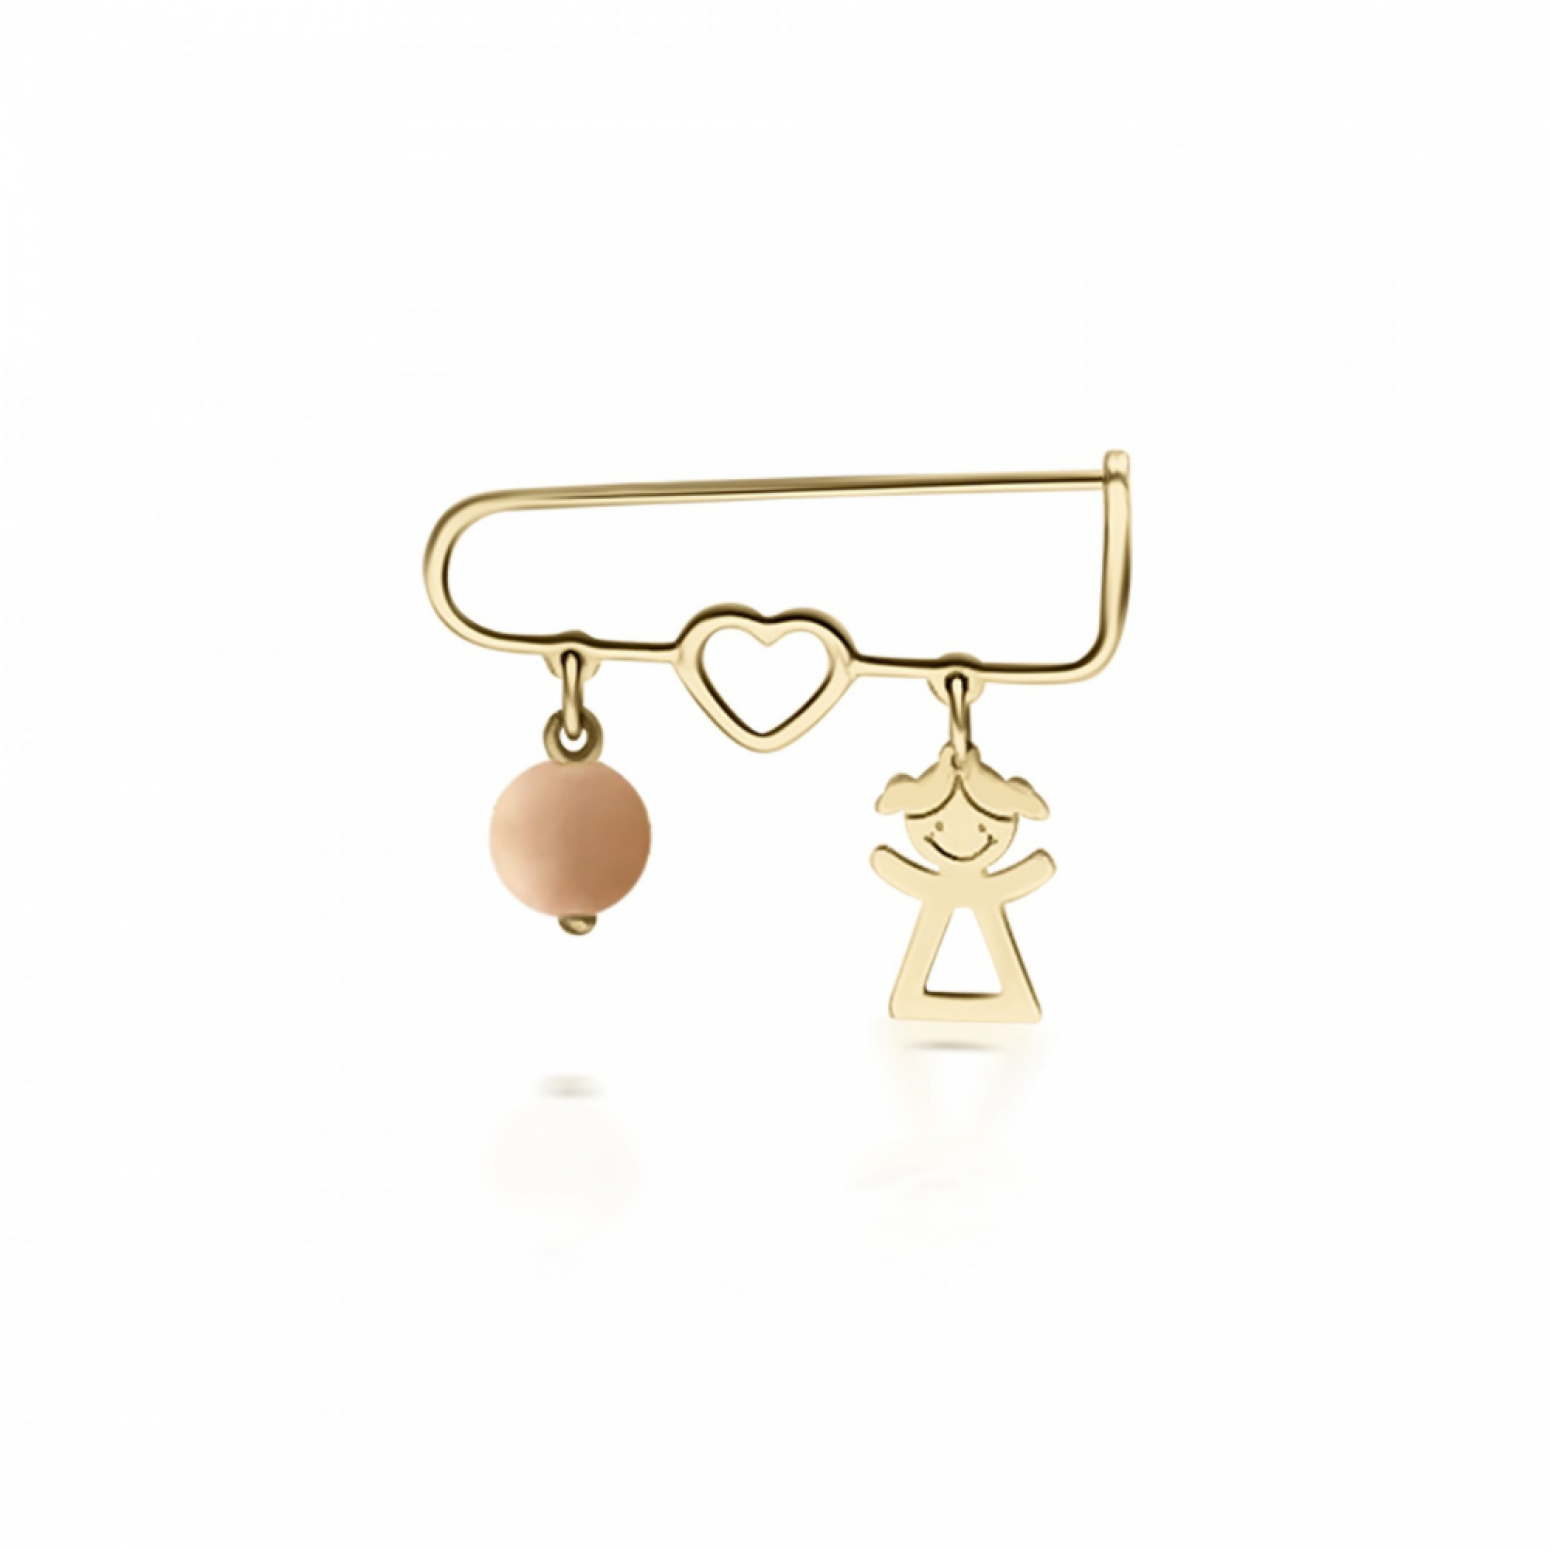 Babies pin K14 gold with girl, heart and pink coral pf0175 BABIES Κοσμηματα - chrilia.gr